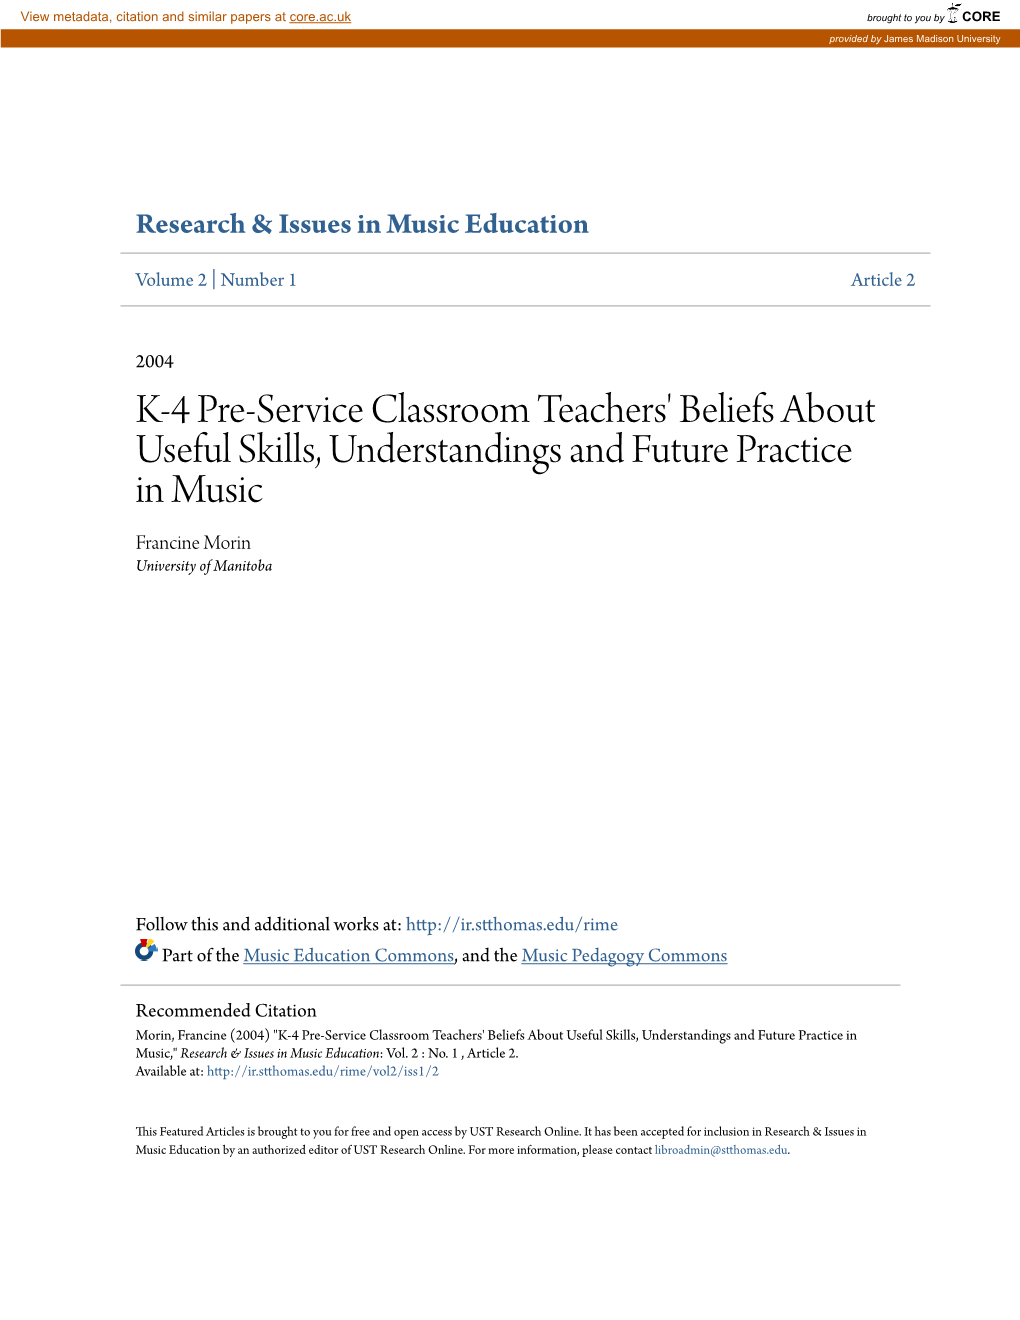 K-4 Pre-Service Classroom Teachers' Beliefs About Useful Skills, Understandings and Future Practice in Music Francine Morin University of Manitoba